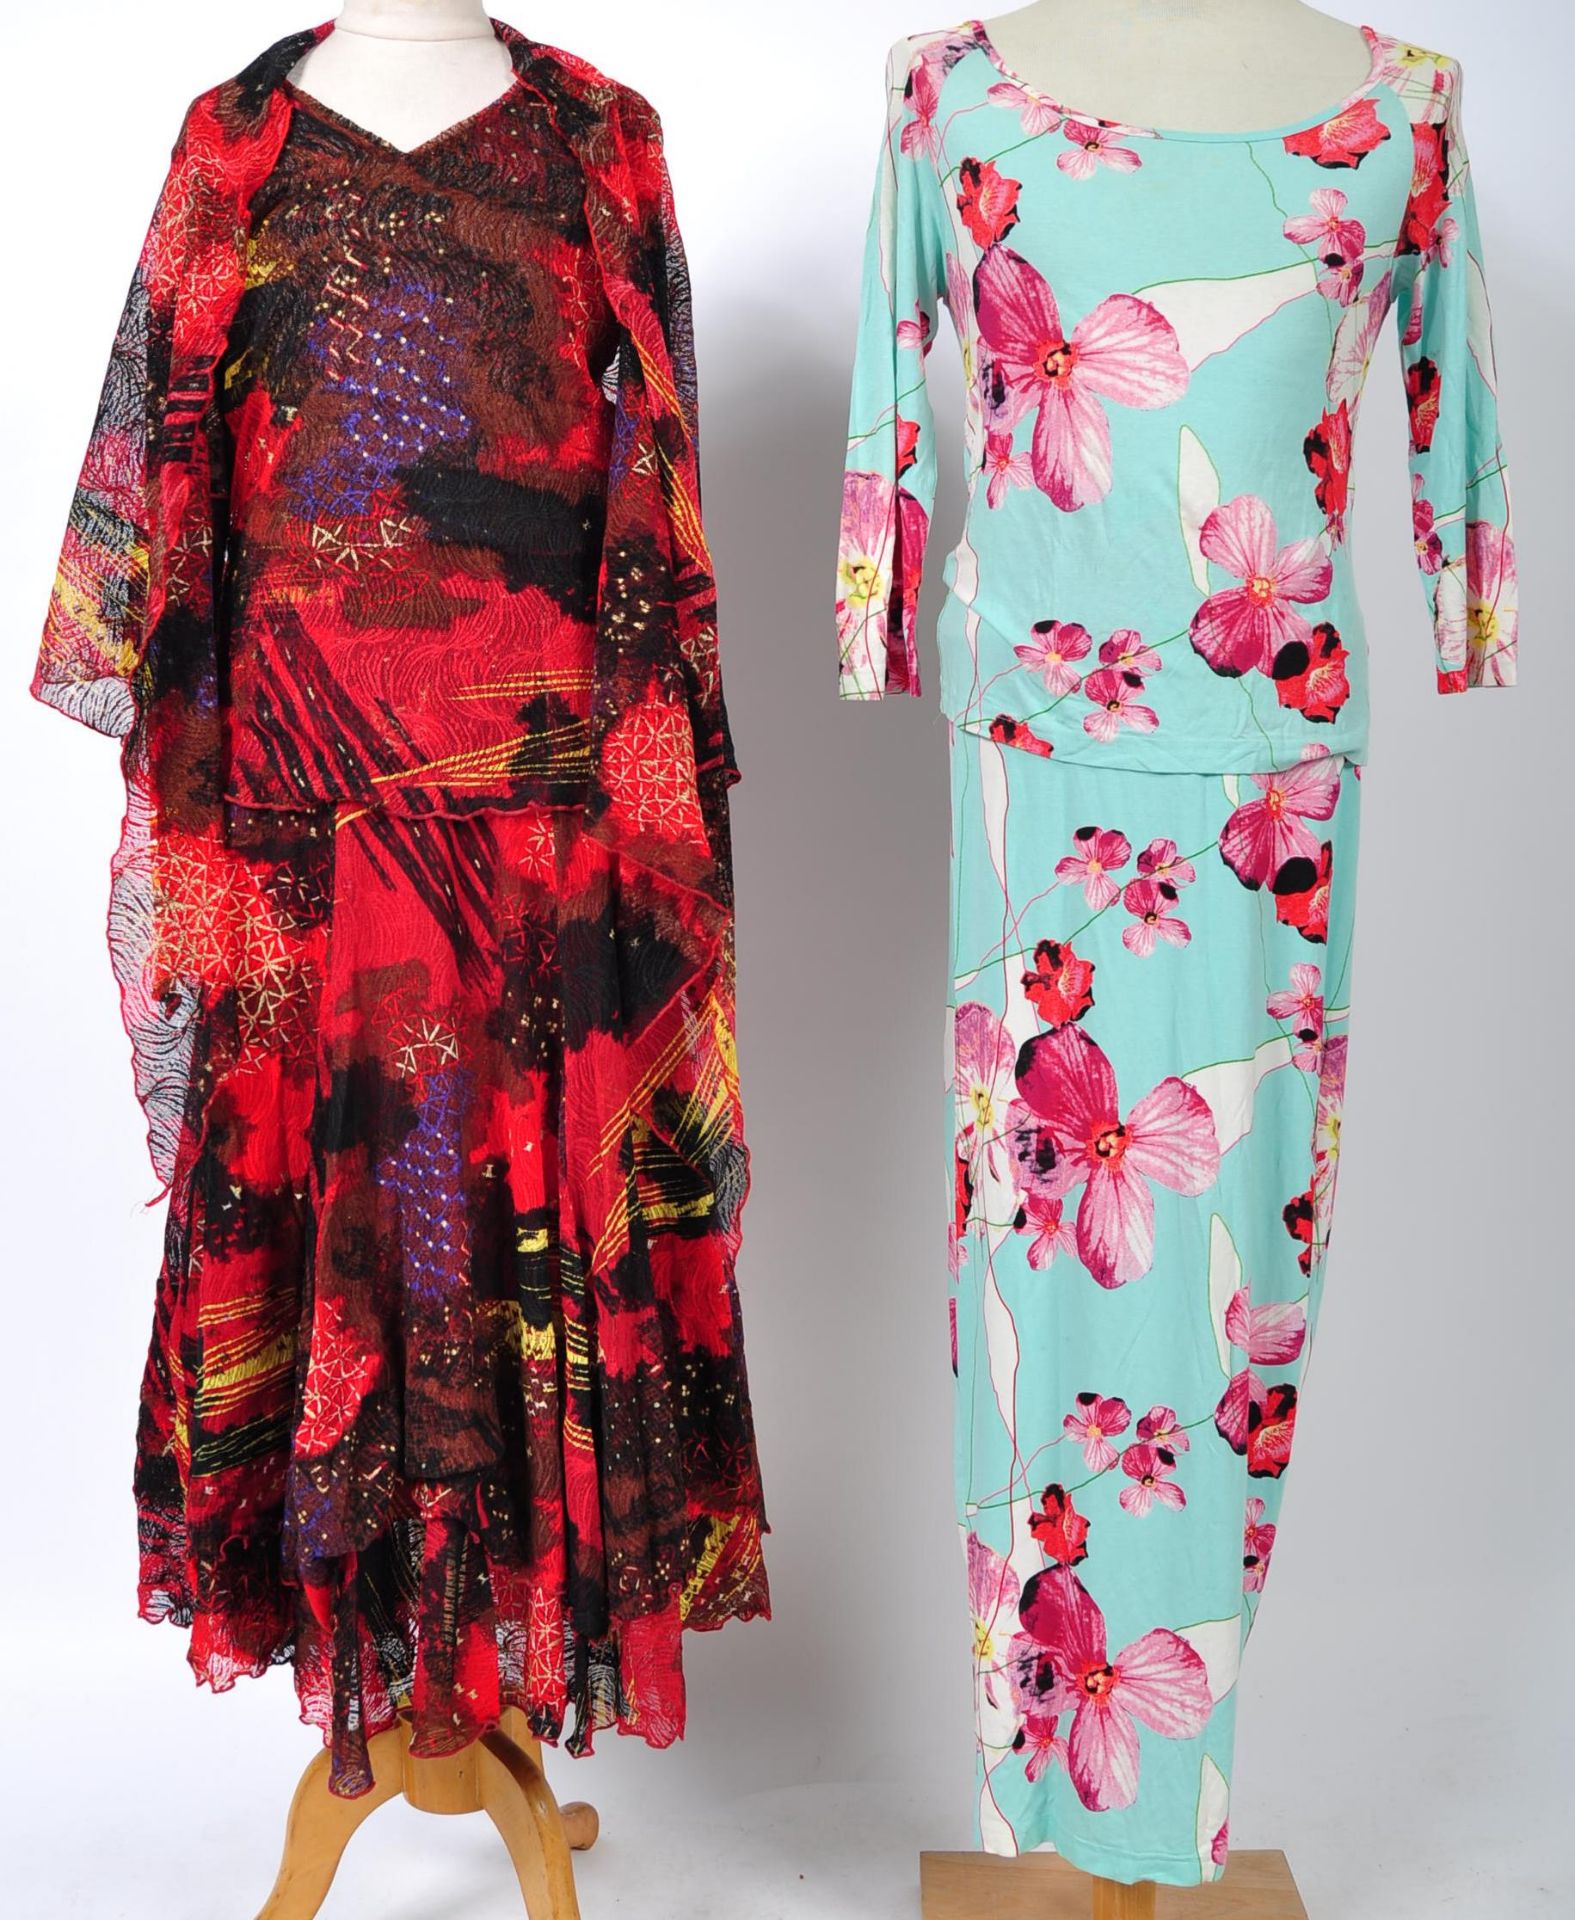 ANGELA GRANT COLLECTION - CHACOK - TWO DRESSES